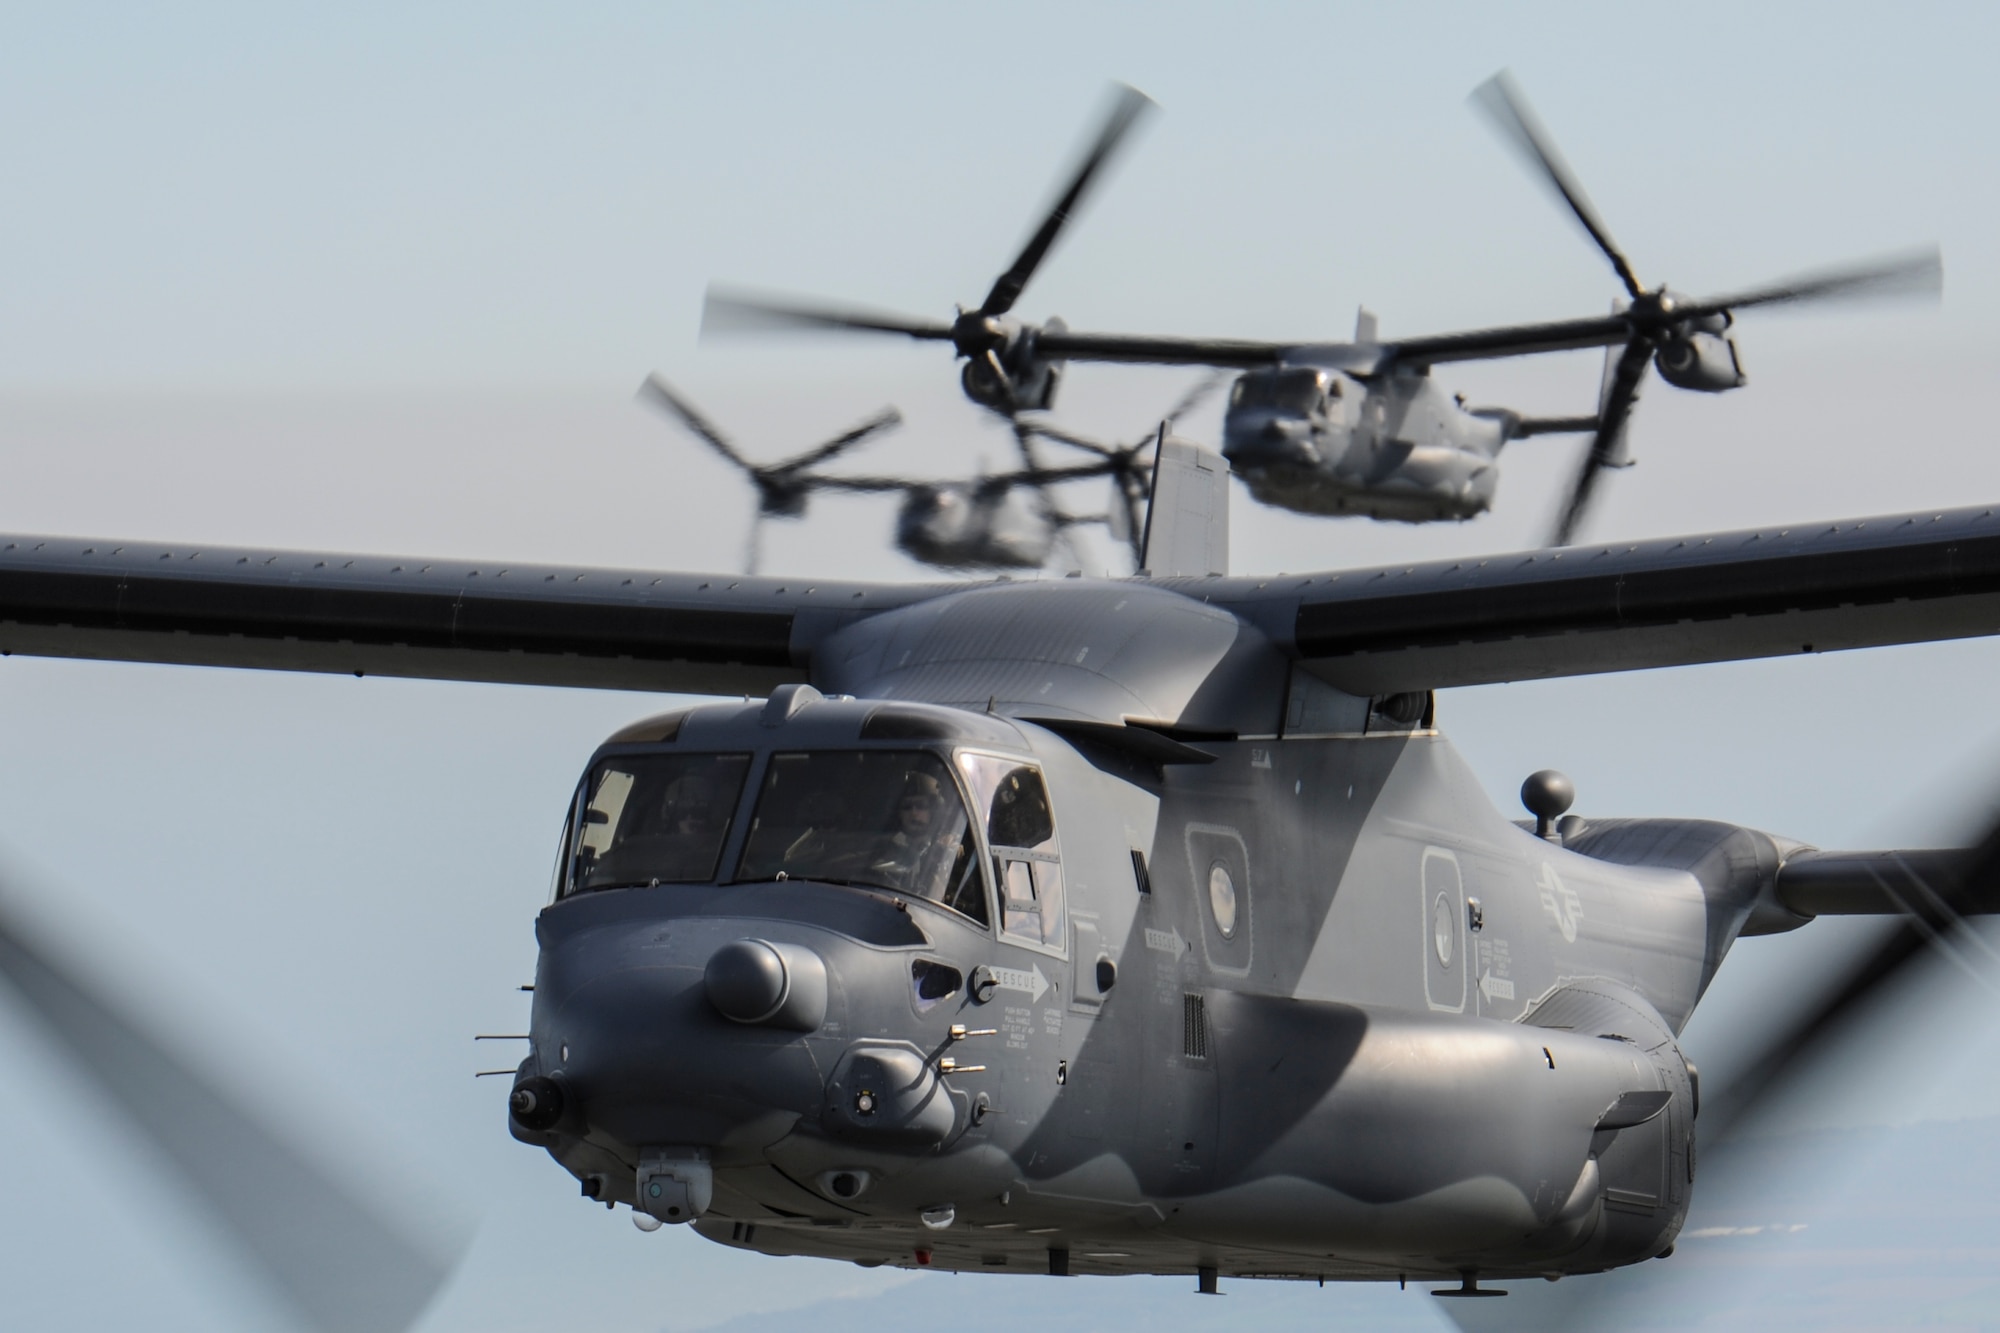 Four CV-22 Osprey aircraft with the 8th Special Operations Squadron from Hurlburt Field, Fla., fly along the Lake Michigan coast, Wis., Oct. 14, 2016. The 8th SOS visited the Milwaukee-Green Bay area for a flyover above Lambeau Field Oct. 16 during the Green Bay versus Dallas NFL game. The Osprey is a tiltrotor aircraft that combines the vertical takeoff, hover and vertical landing qualities of a helicopter with the long-range, fuel efficiency and speed characteristics of a turboprop aircraft. (U.S. Air Force photo by Airman 1st Class Joseph Pick)